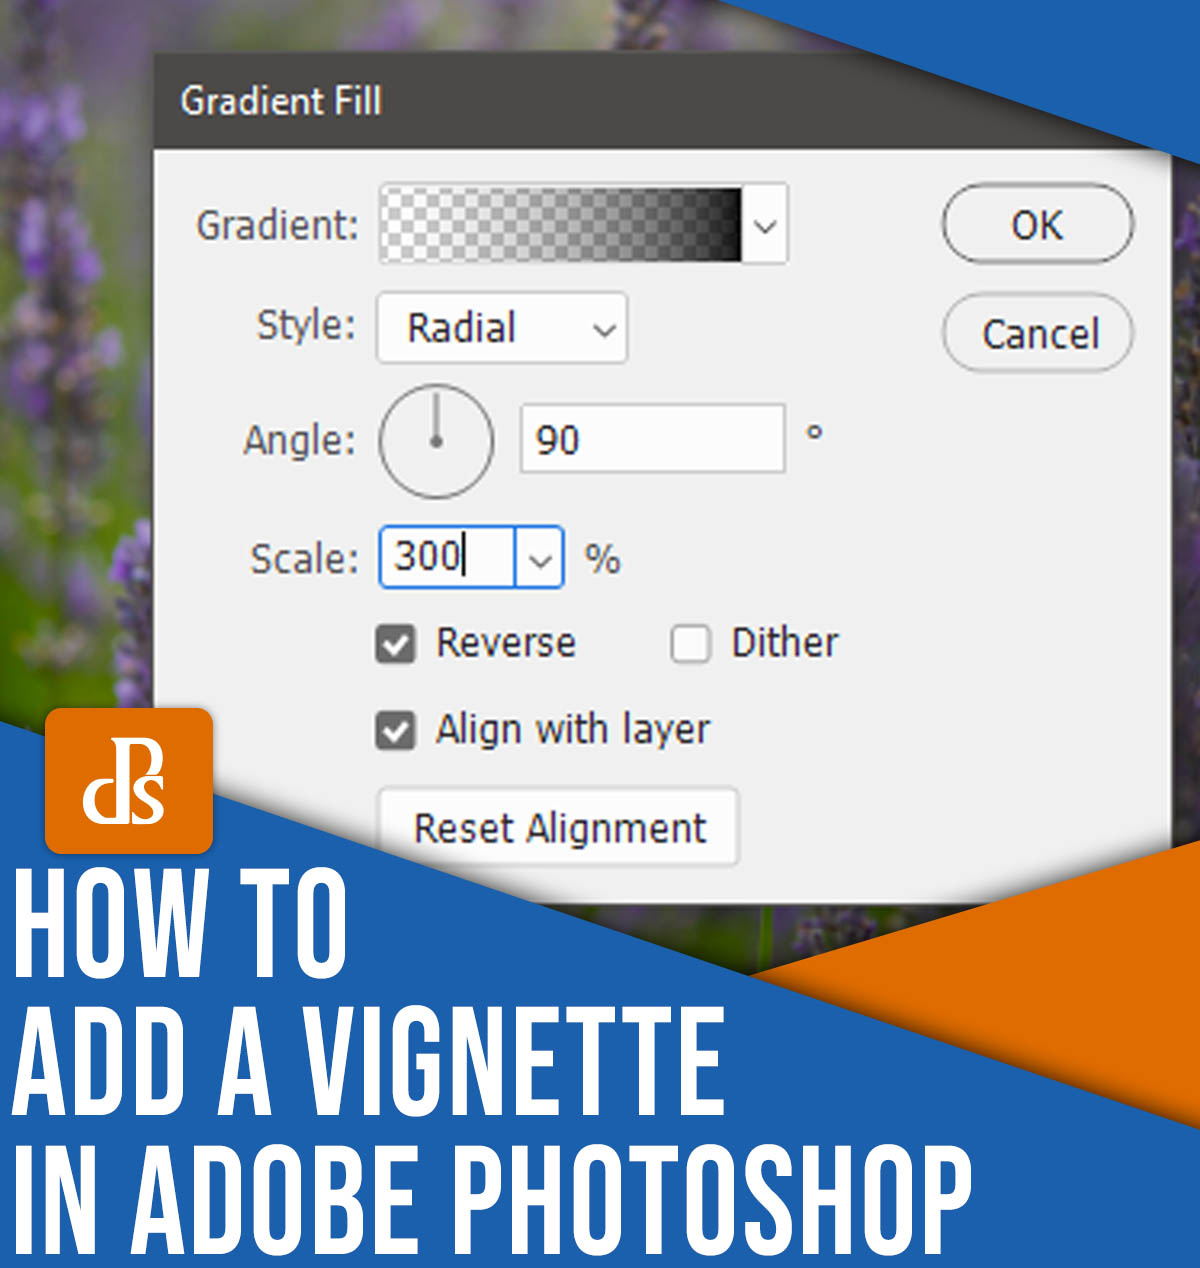 How to add a vignette in Adobe Photoshop